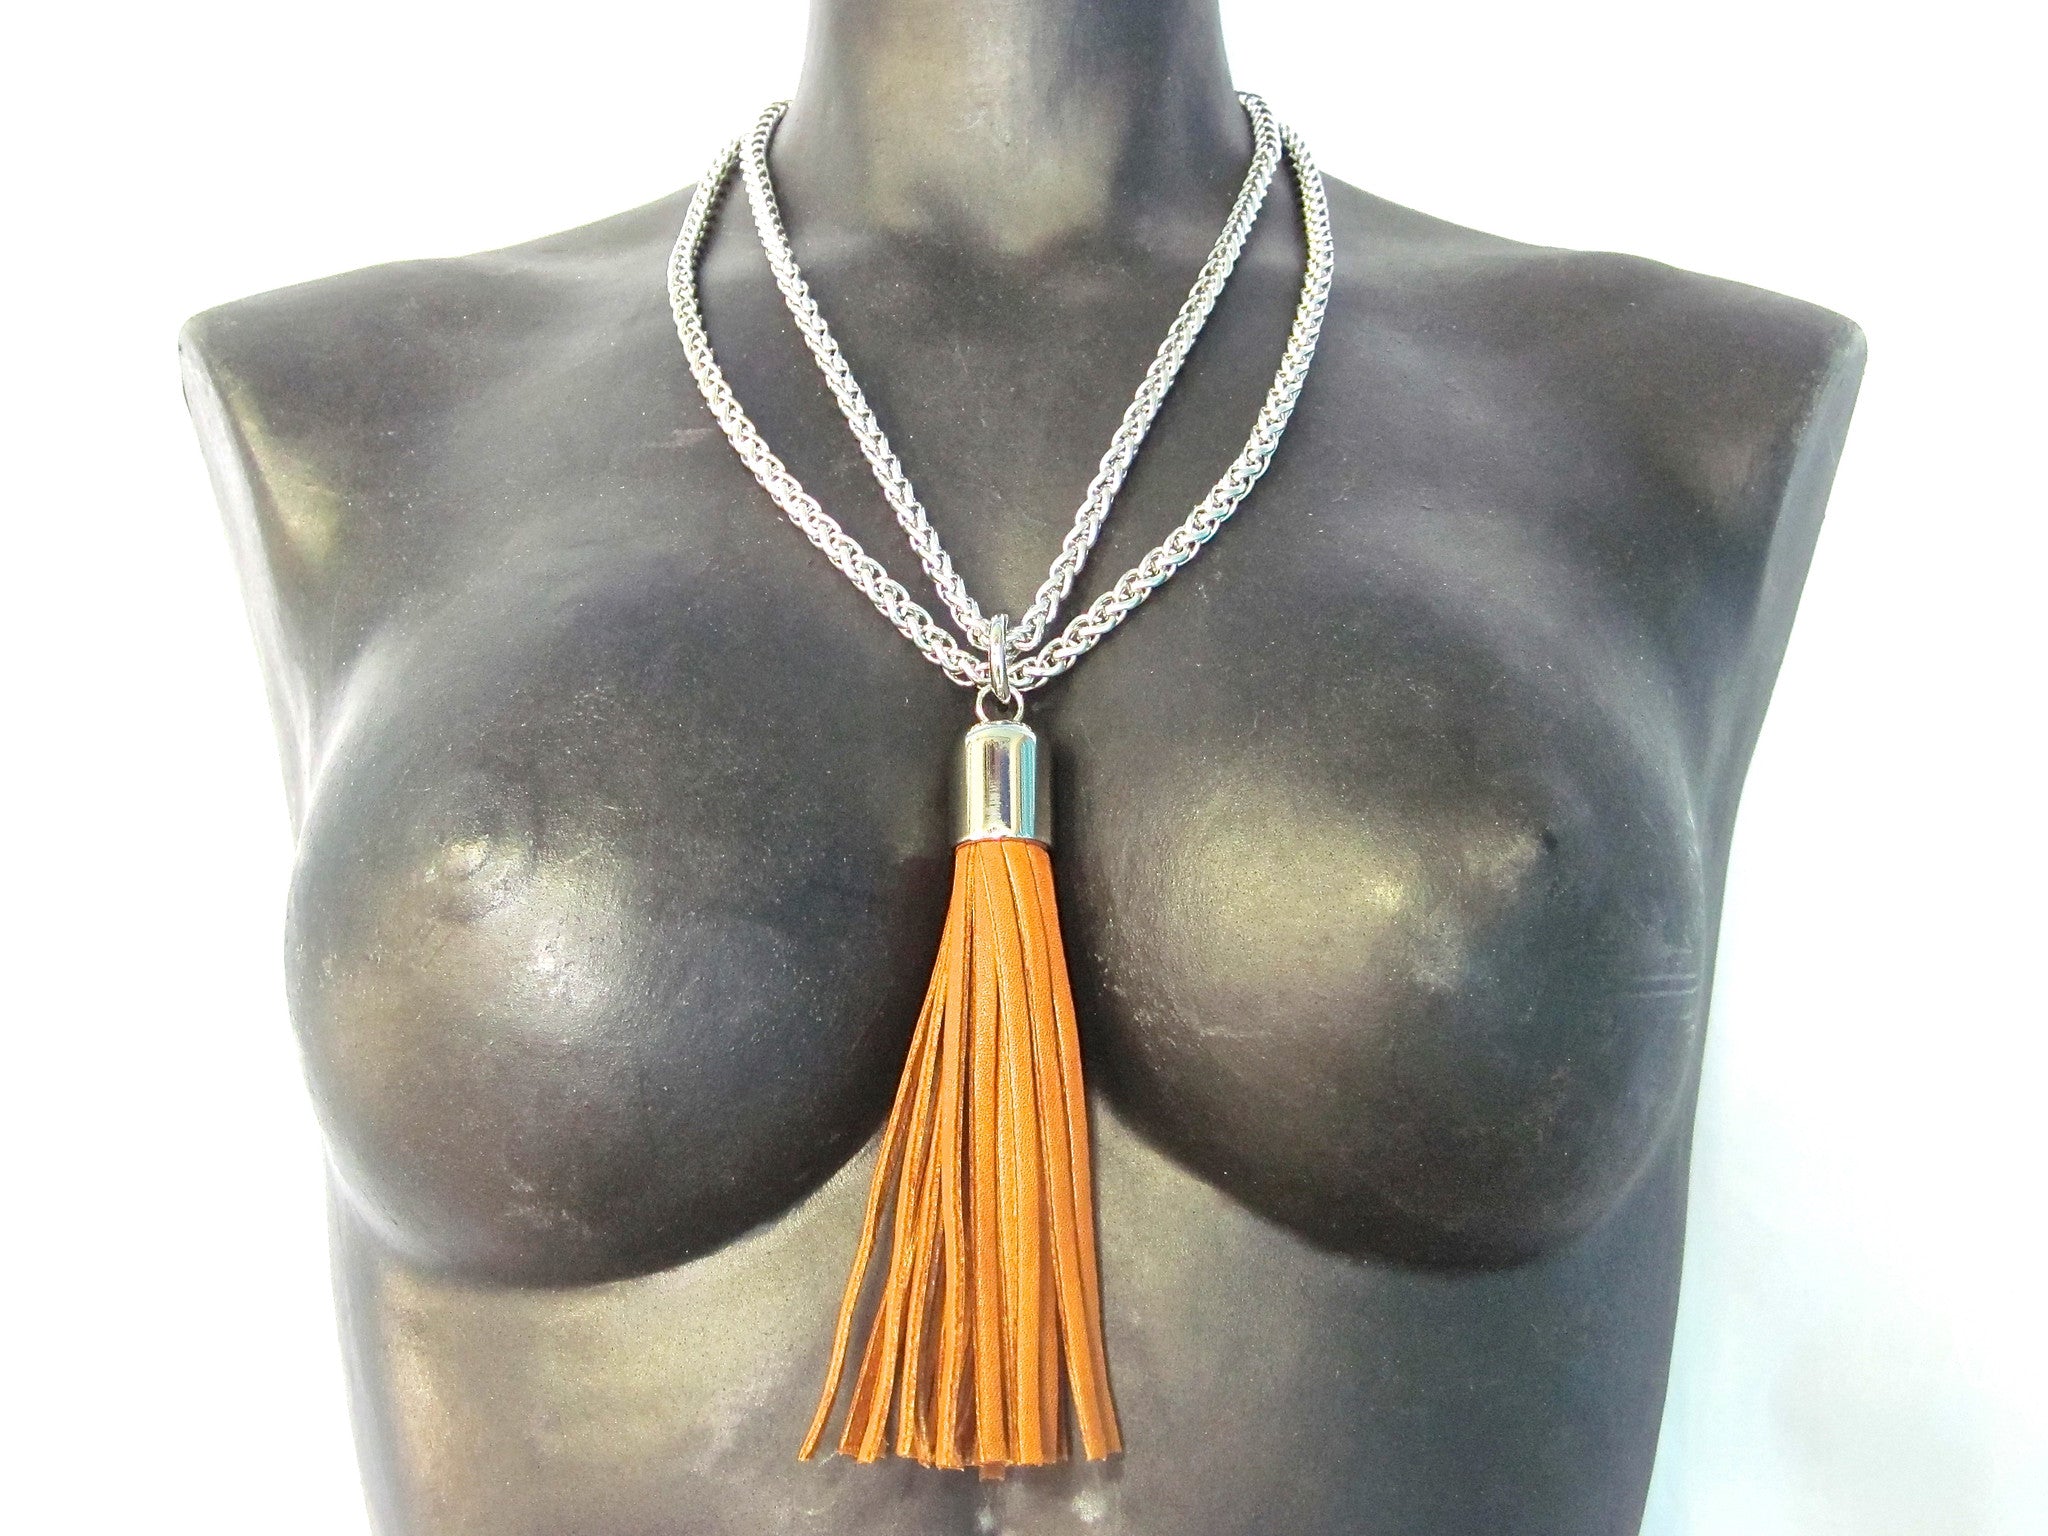 STAINLESS STEEL CHAINS AND LARGE DEERSKIN LEATHER TASSEL NECKLACE by nyet jewelry